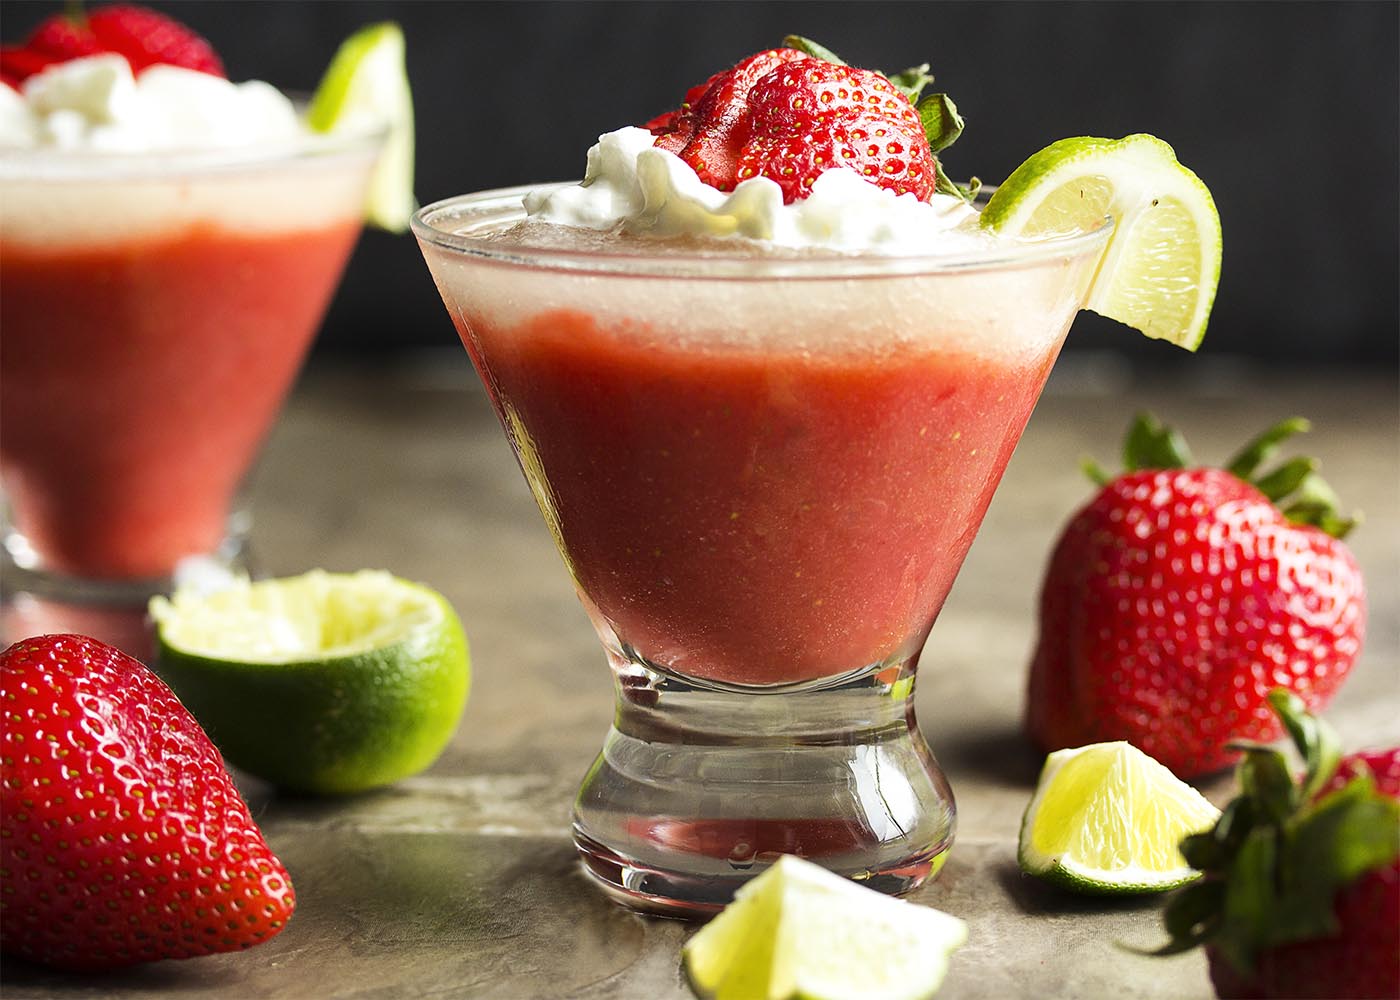 Two strawberry daiquiri cocktails each layered with lime and garnished with strawberries and whipped cream.